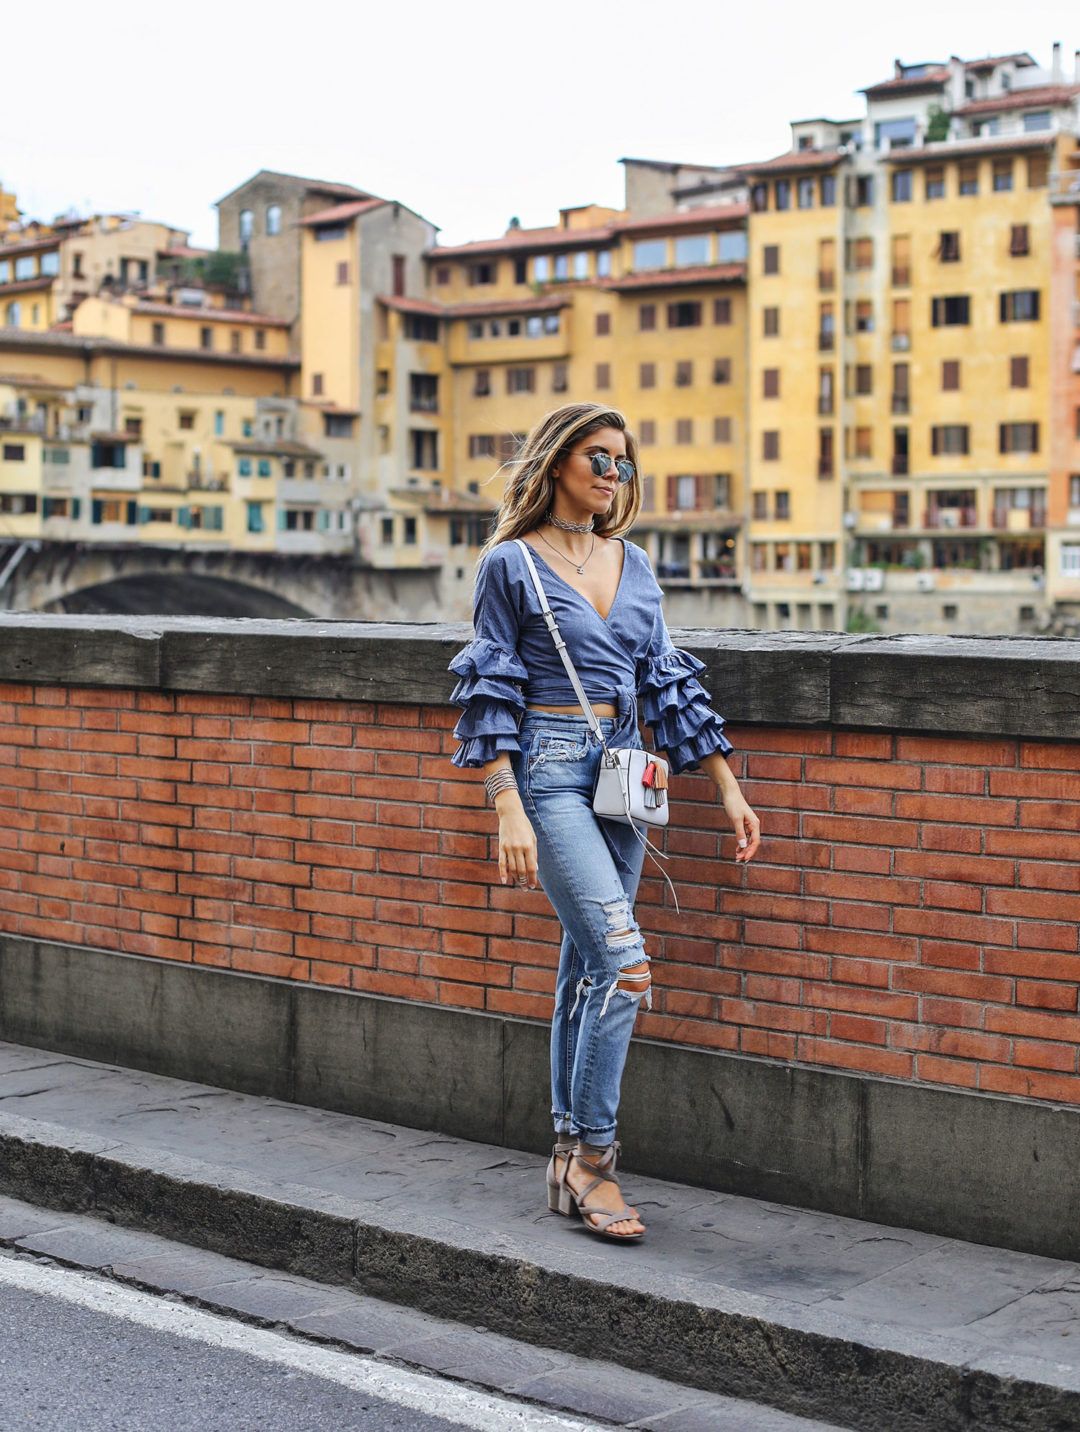 Fashion and lifestyle blogger Adelina Perrin of The Charming Olive wearing Tularosa wrap top, Grlfrnd denim jeans and Rebecca Minkoff bag